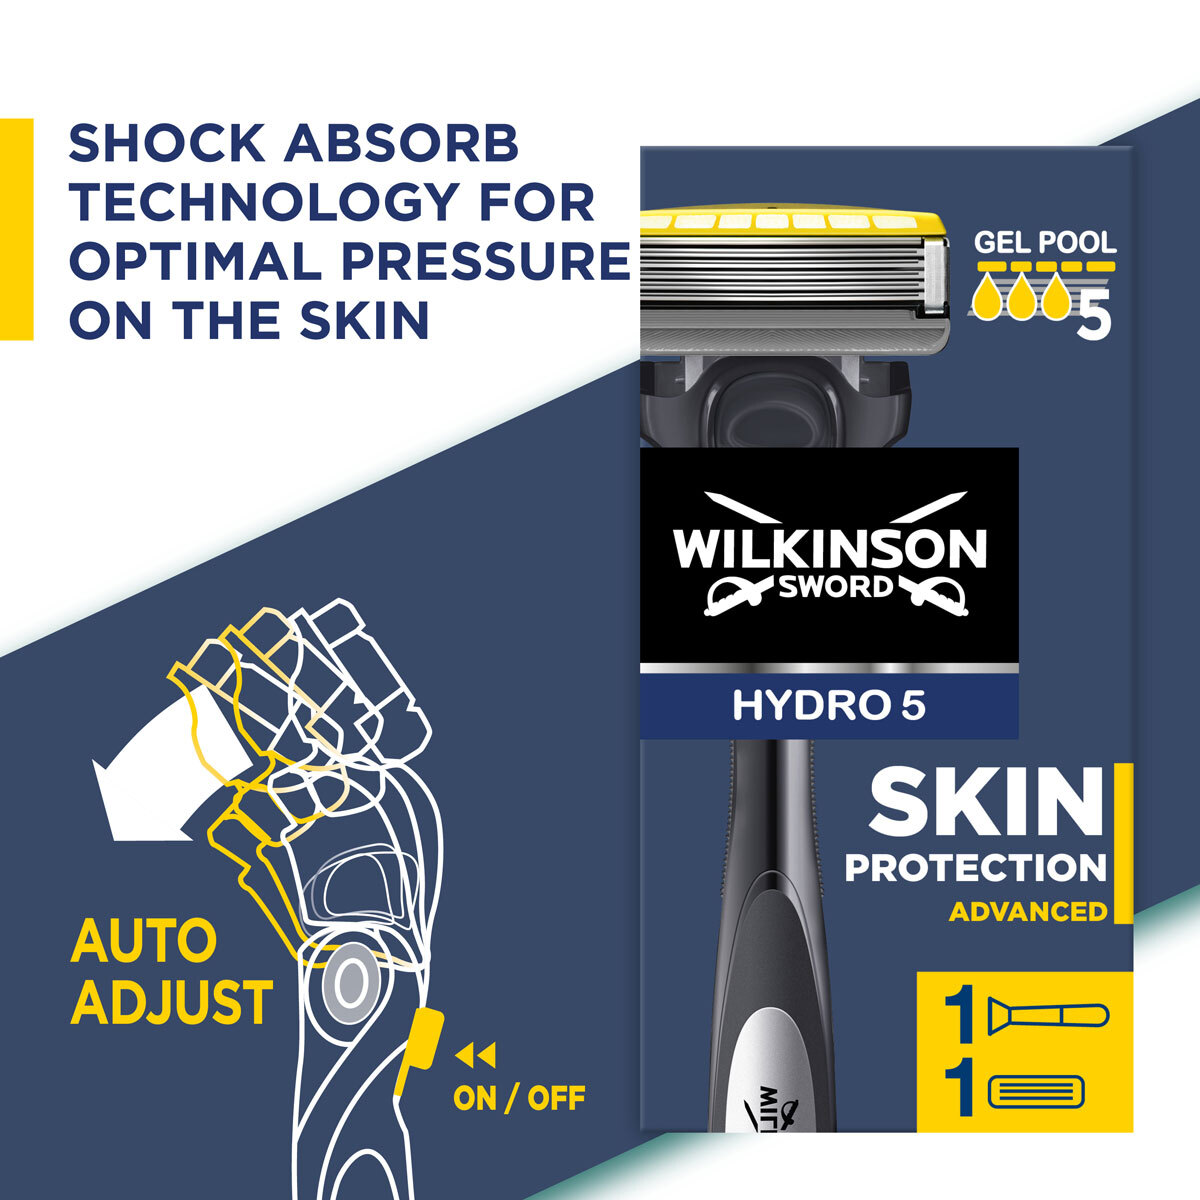 Shock Absorb Technology